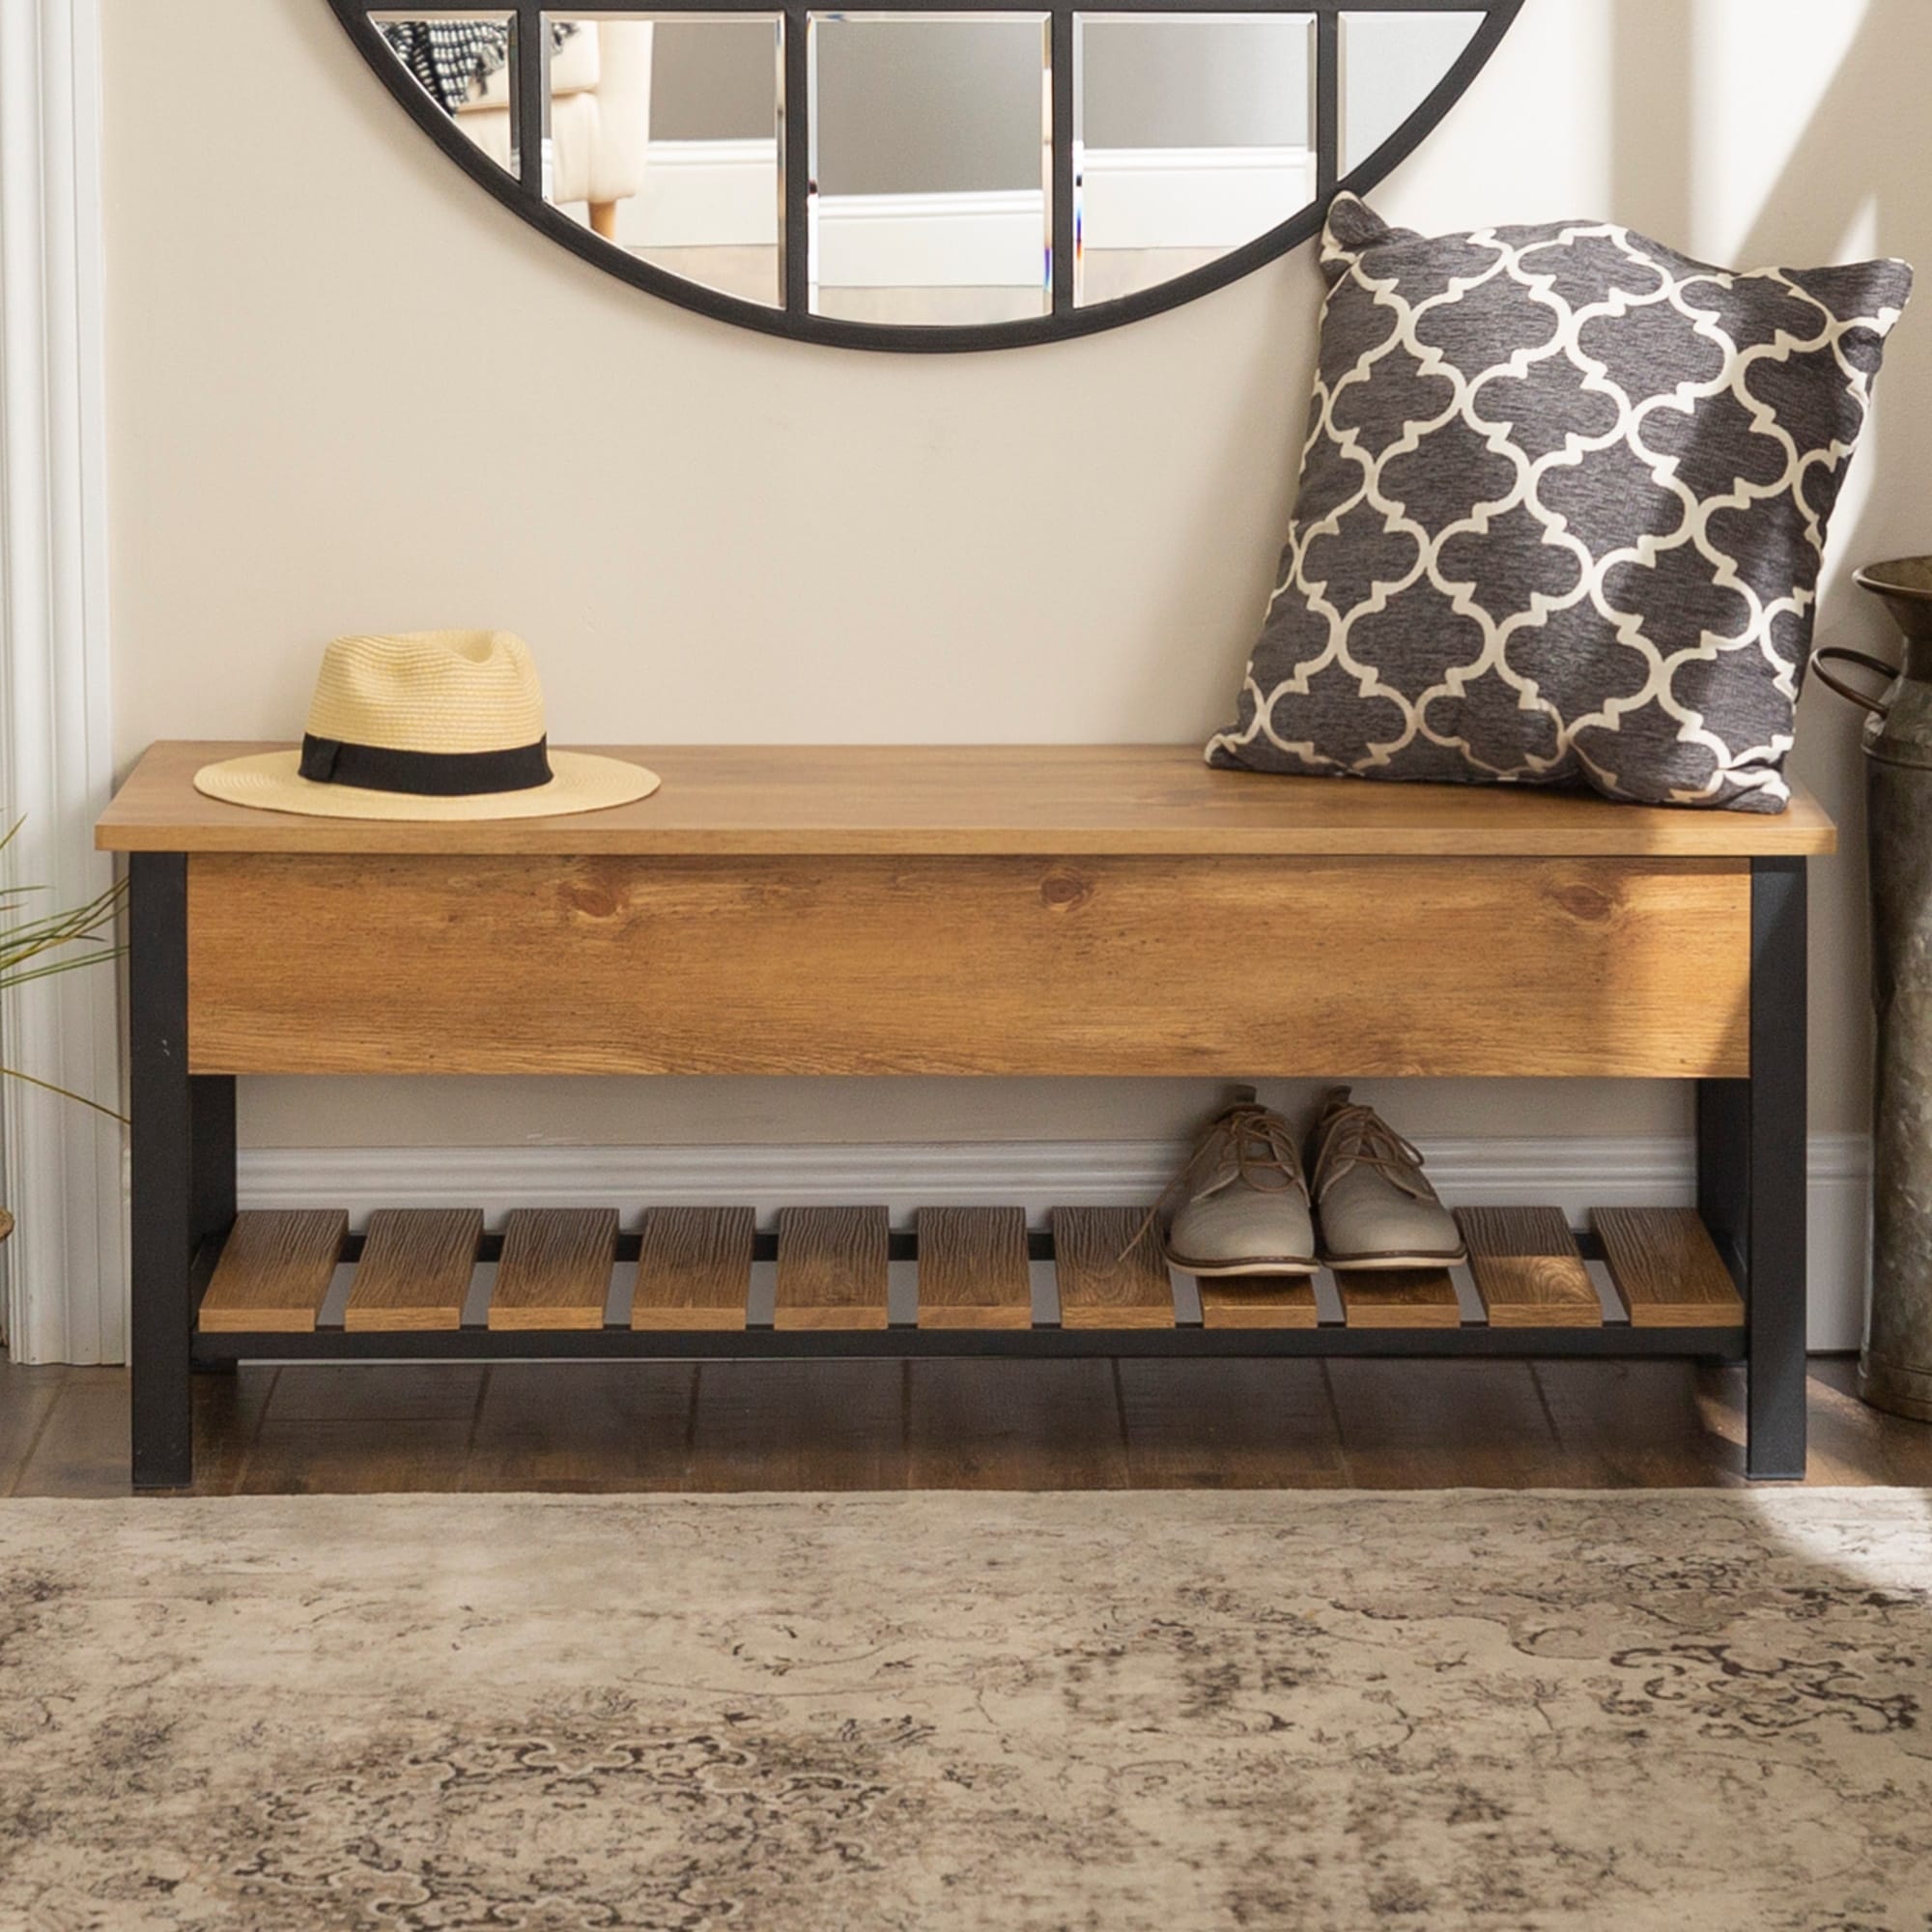 https://ak1.ostkcdn.com/images/products/is/images/direct/e4352dd2062ab1294d7b970a891c4cae855da7d1/The-Gray-Barn-Paradise-Hill-Lift-top-Storage-Bench.jpg